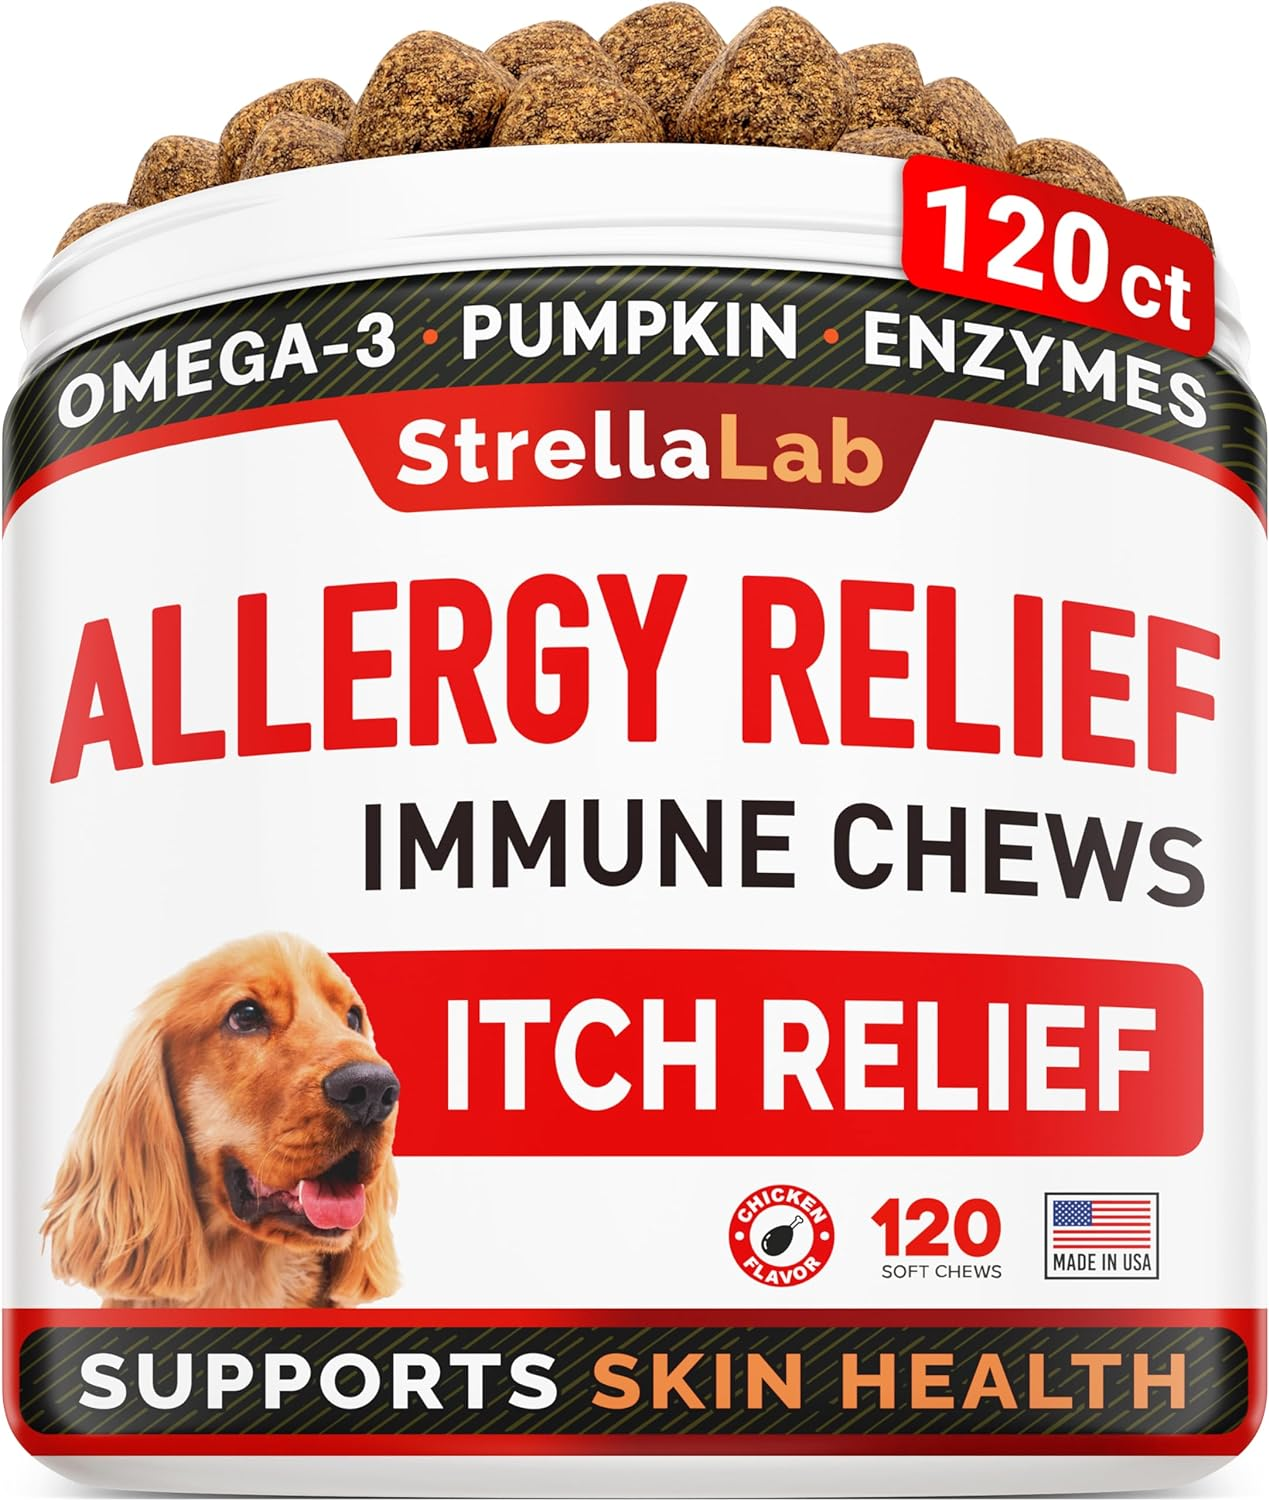 STRELLALAB Dog Allergy Relief + Itchy Skin Treatment with Omega 3 & Pumpkin, Dogs Itching & Licking Treats, Itch Chew,